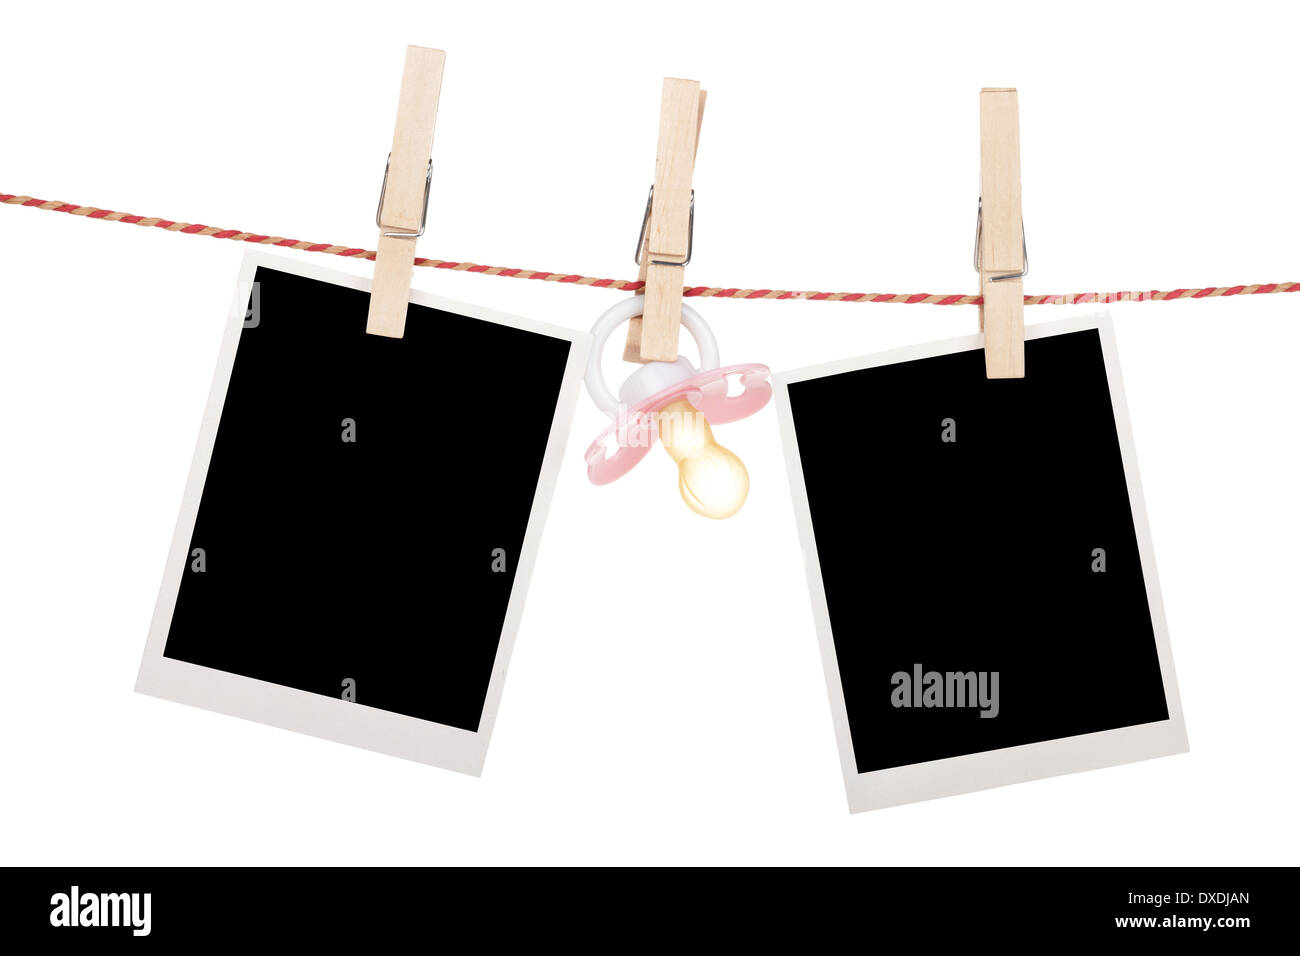 Instant photo frames and pacifier hanging on the clothesline. Isolated on white background Stock Photo